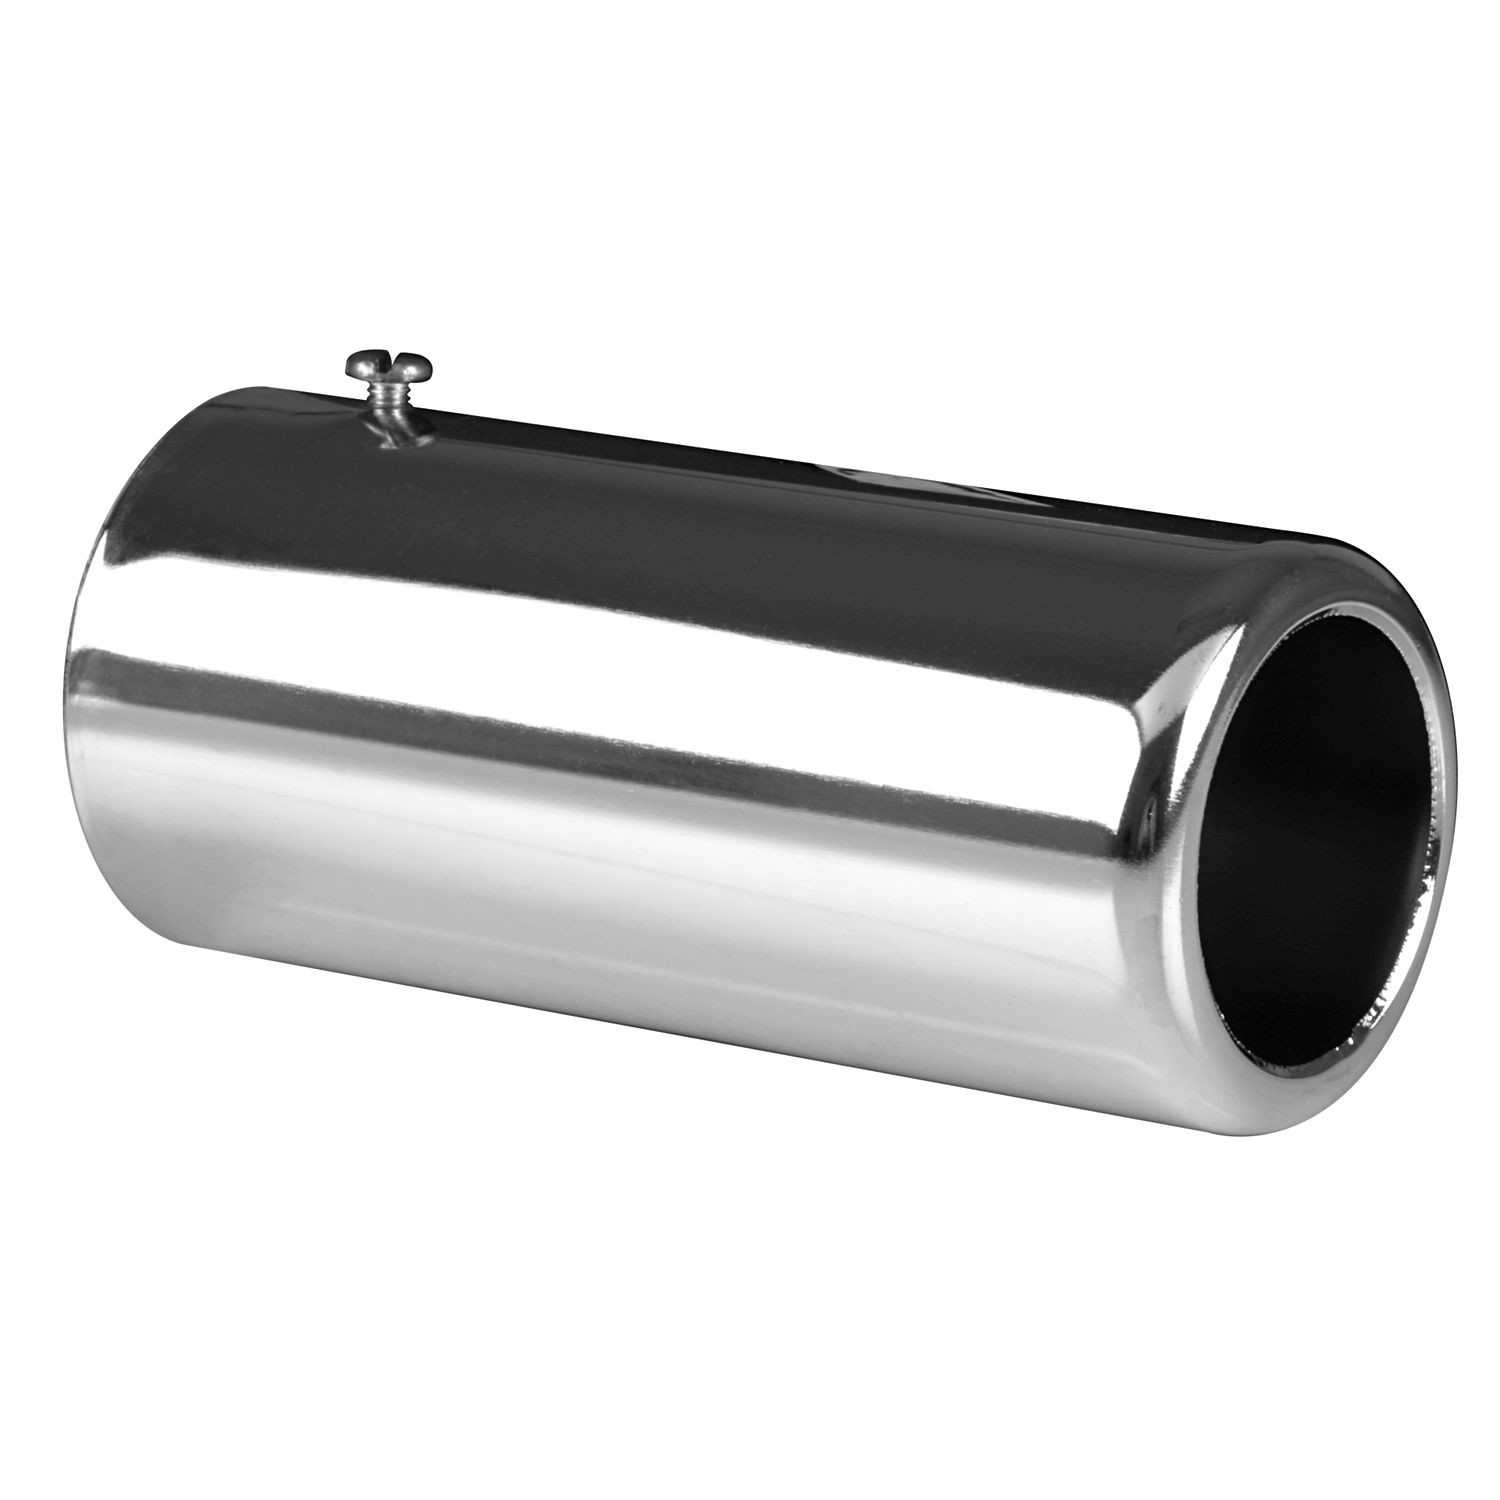 AP EXHAUST W/O FEDERAL CONVERTER - Exhaust Tail Pipe Tip - APK 9822